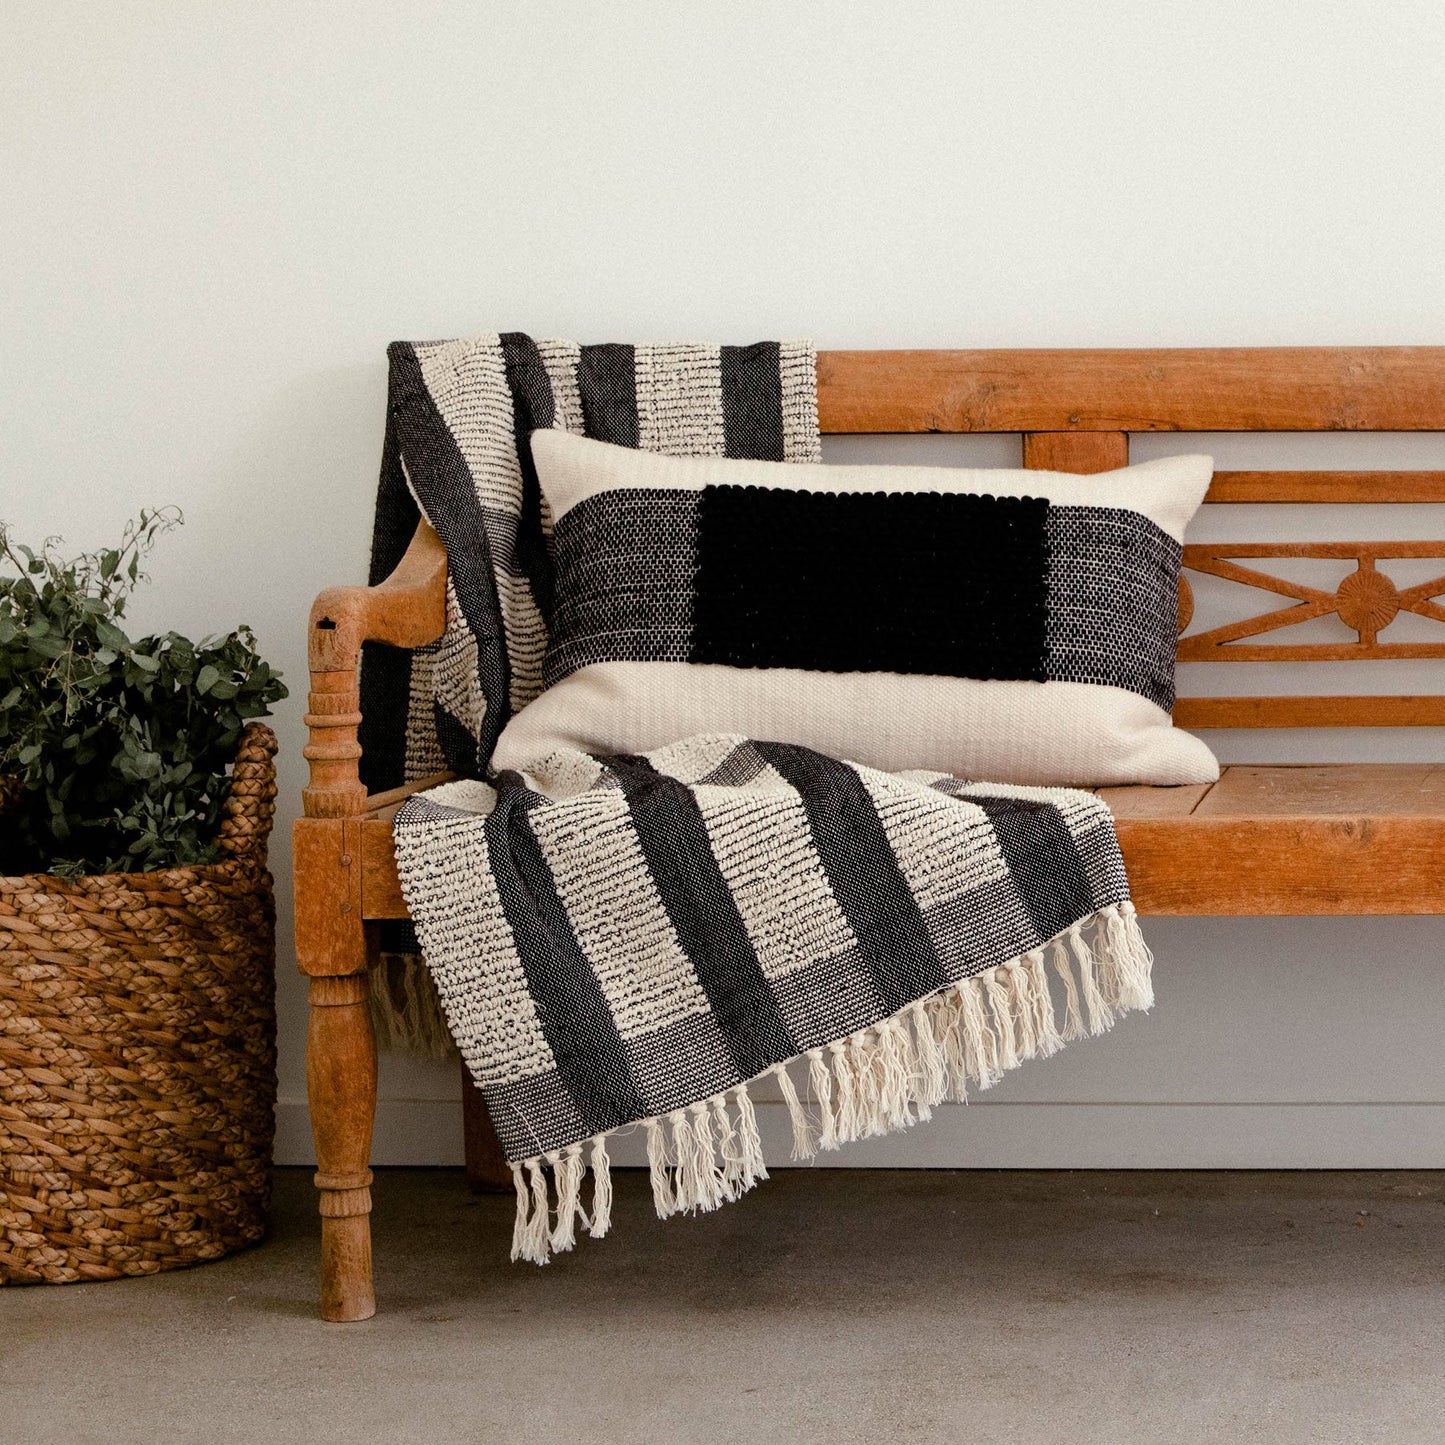 The Cruz Pillow features a natural colored flat weave mixed with a wide contrast stripe of black textured loops. Ethically produced and hand woven by talented artisans in India.